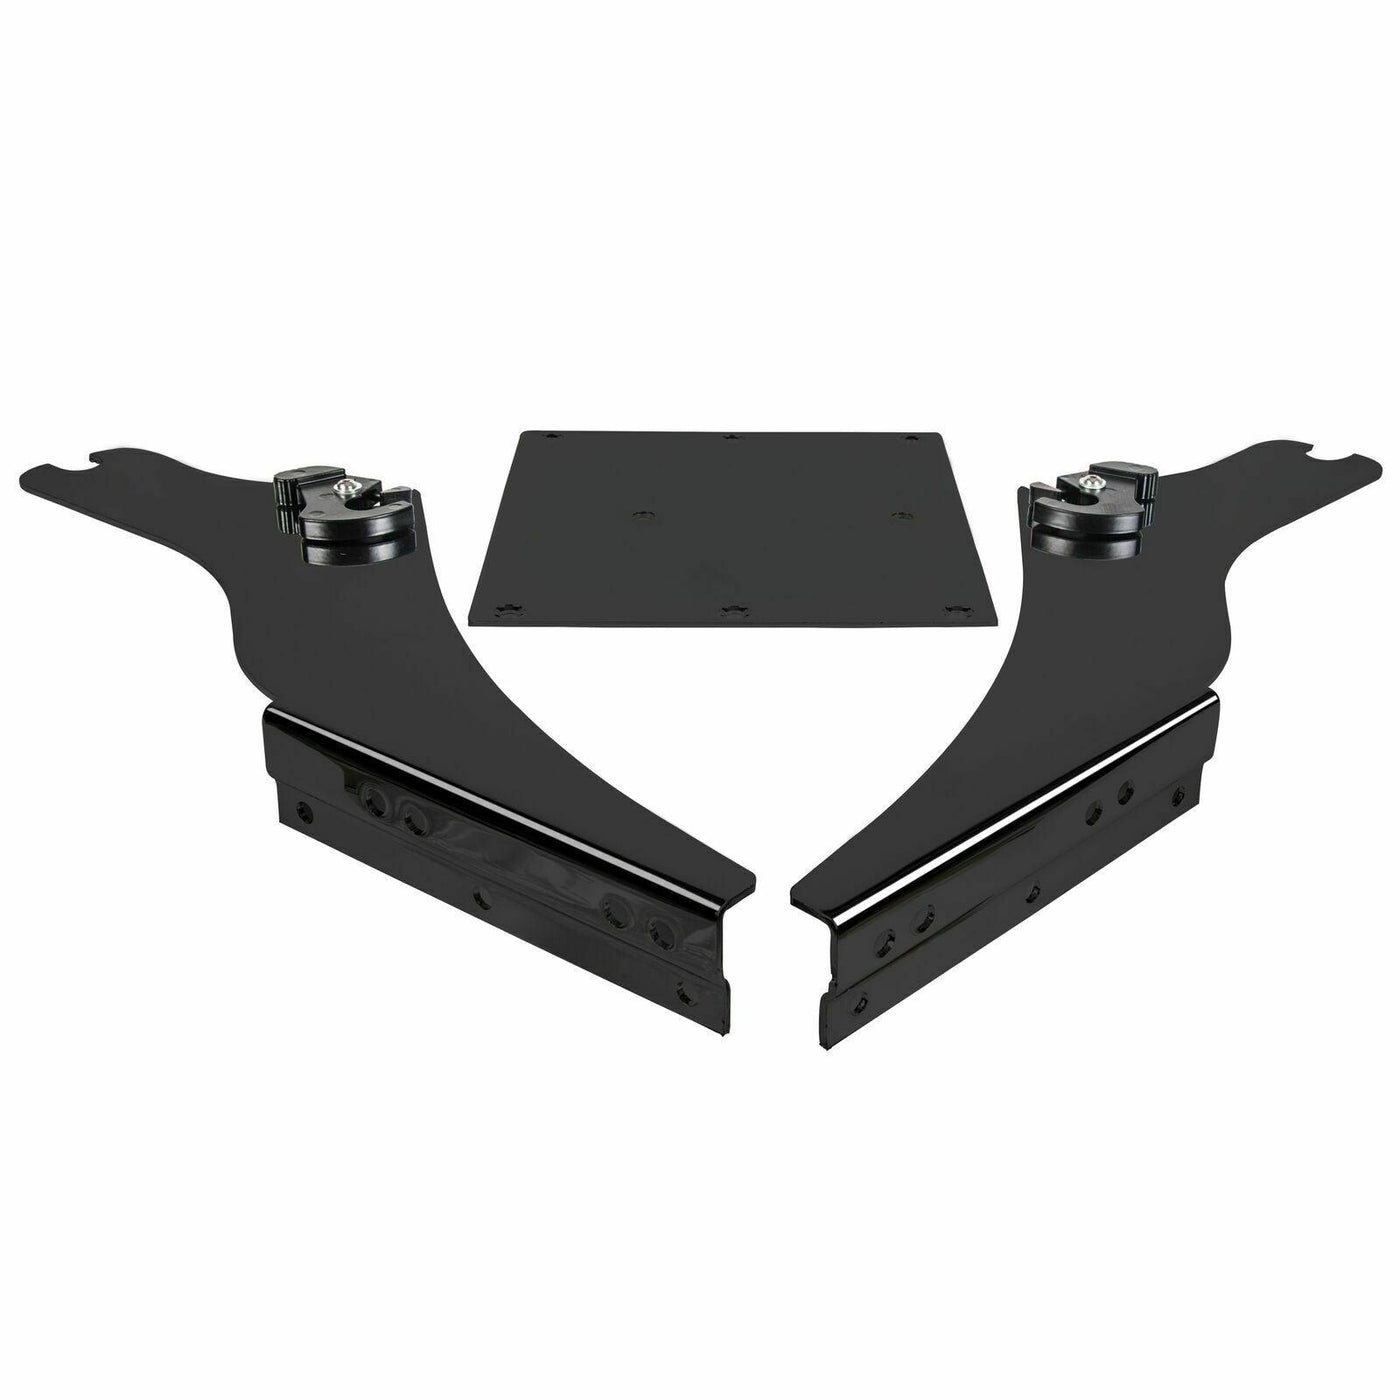 Detachable Tour Pack Luggage Rack Trunk Bracket For Harley 97-08 Electra Glide - Moto Life Products